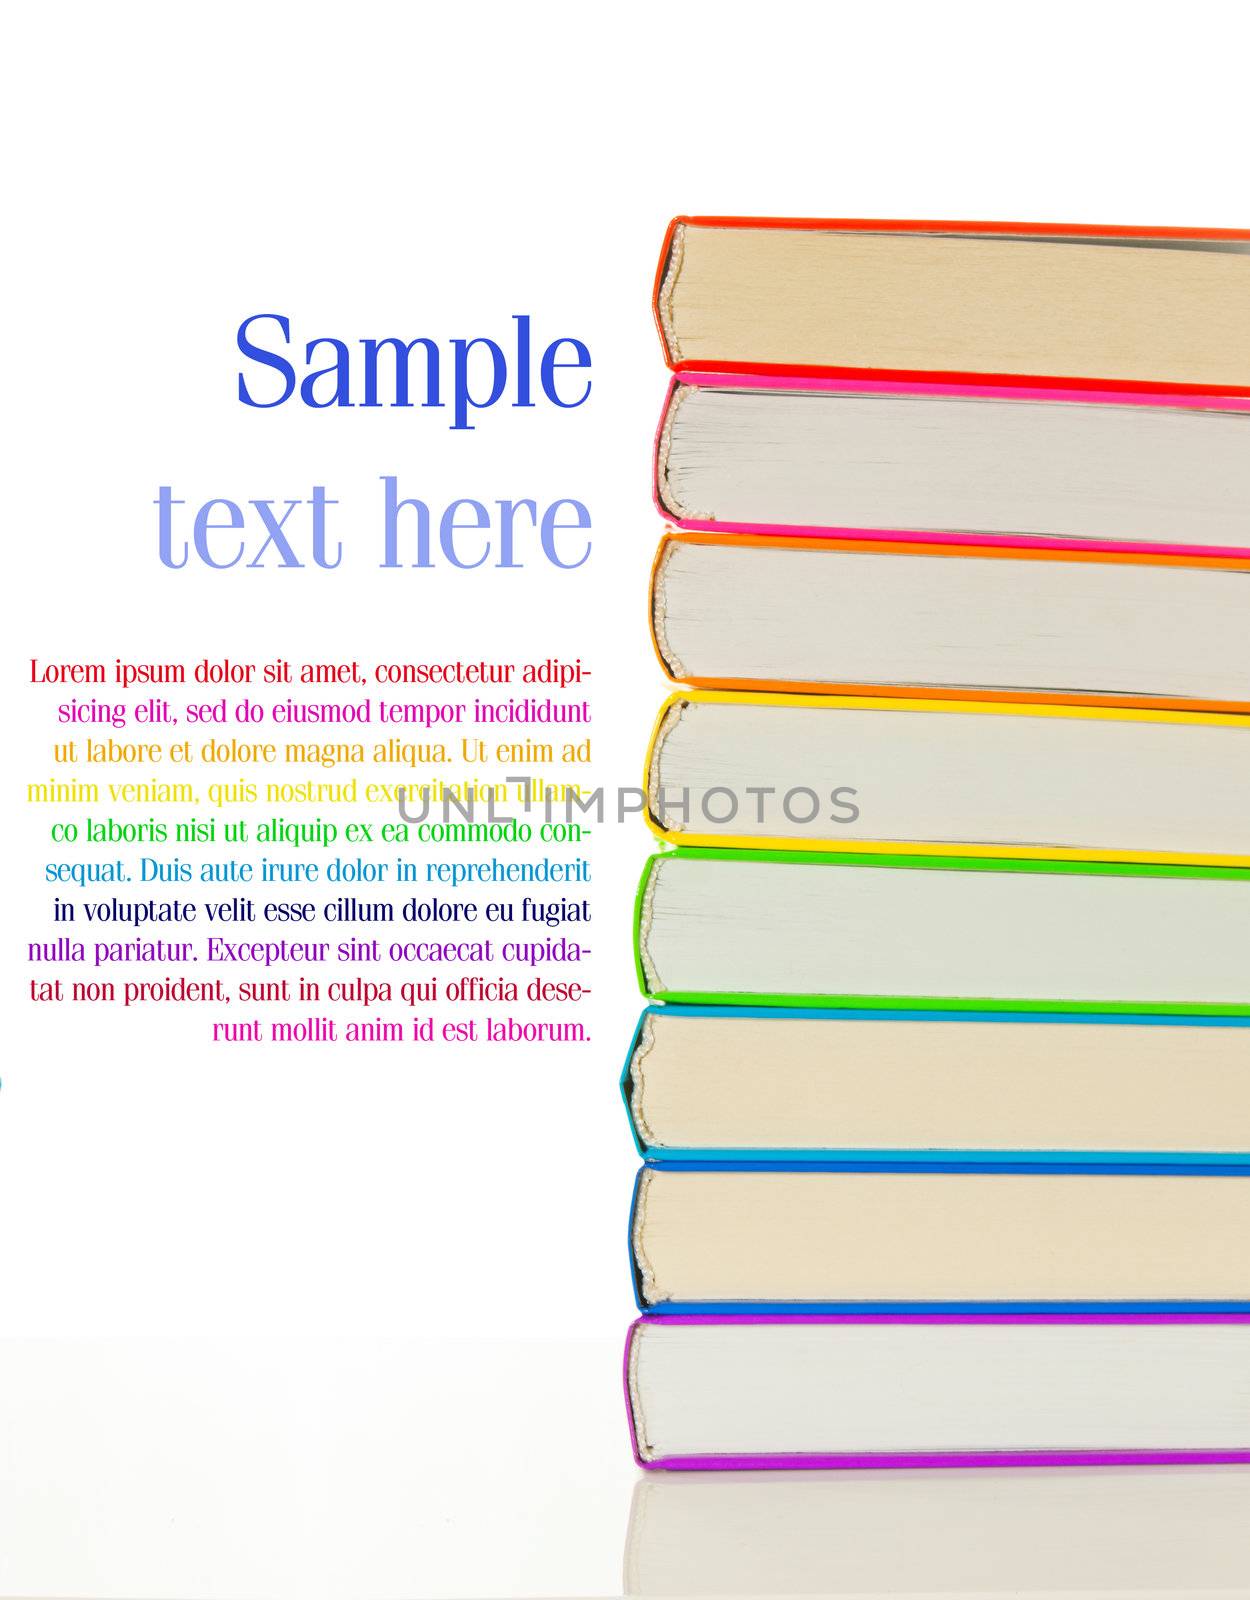 Stack of colorful books - library concept